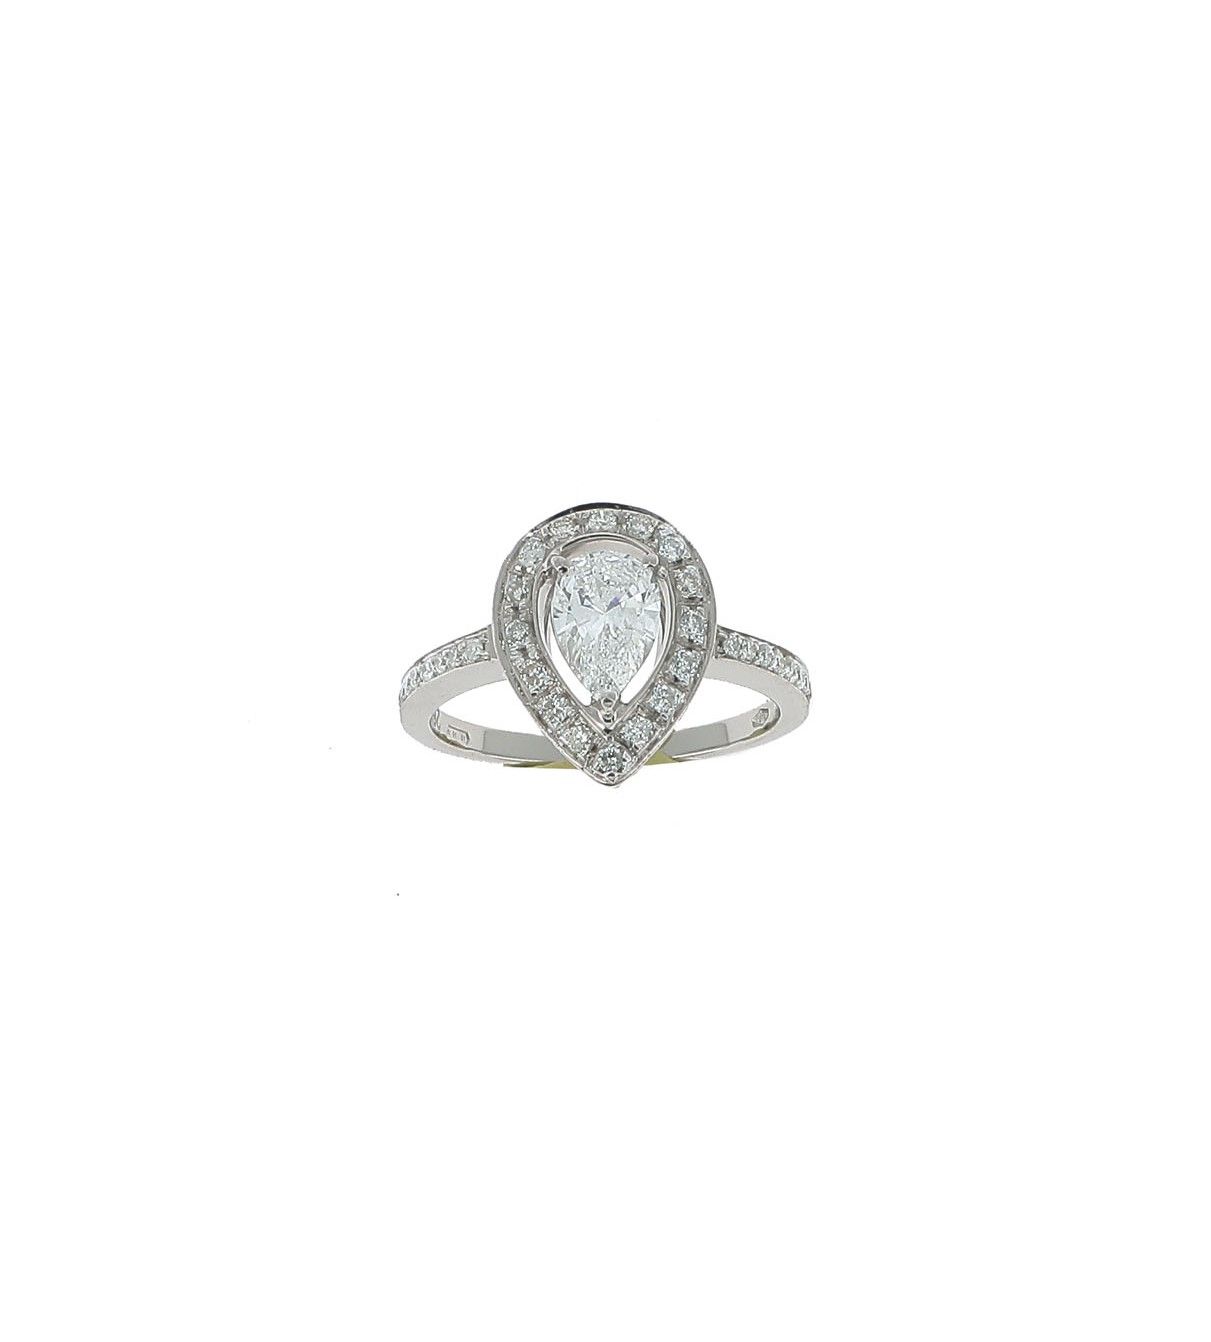 Null GOUTTE RING

A white gold ring set with a pear shaped diamond weighing 0.60&hellip;